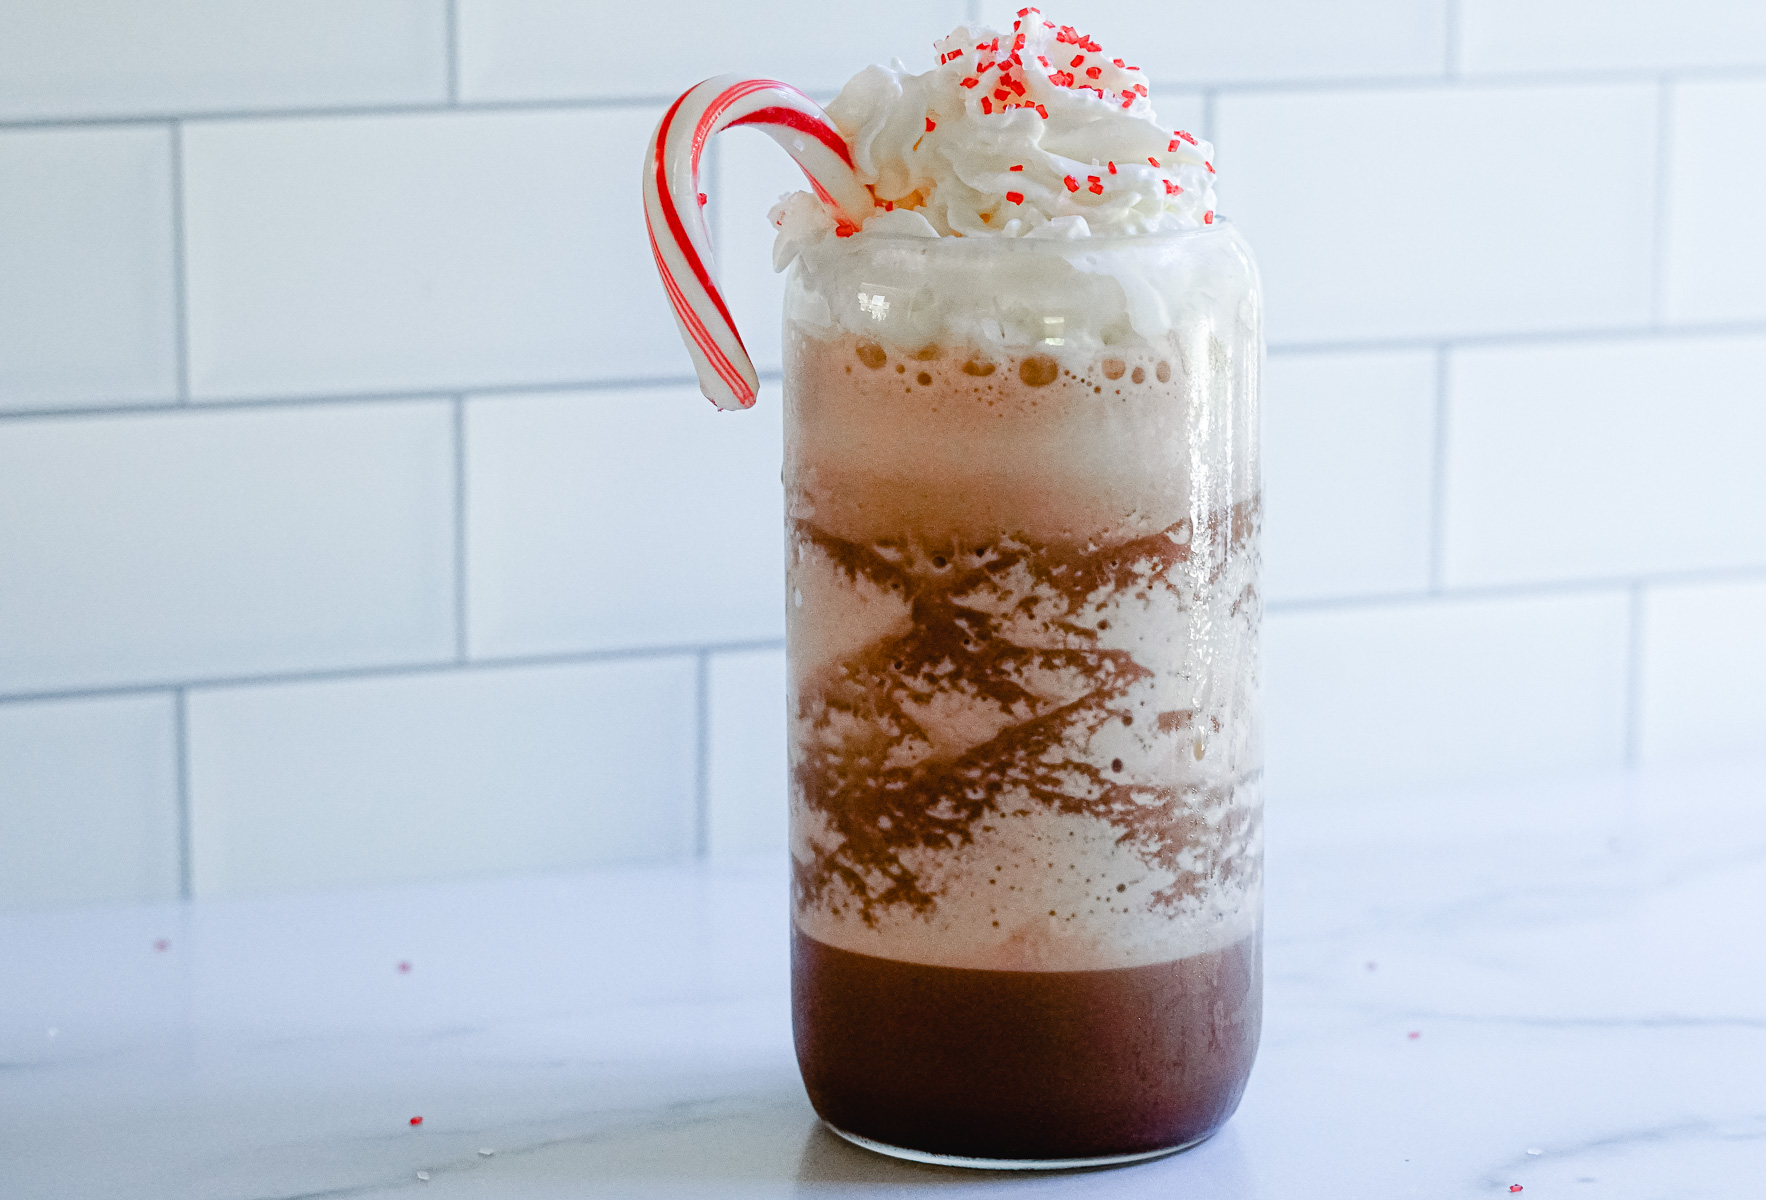 Copycat Starbucks Peppermint Mocha Frappuccino Recipe in a clear glass topped with whipped cream, red sprinkles and a candy cane.